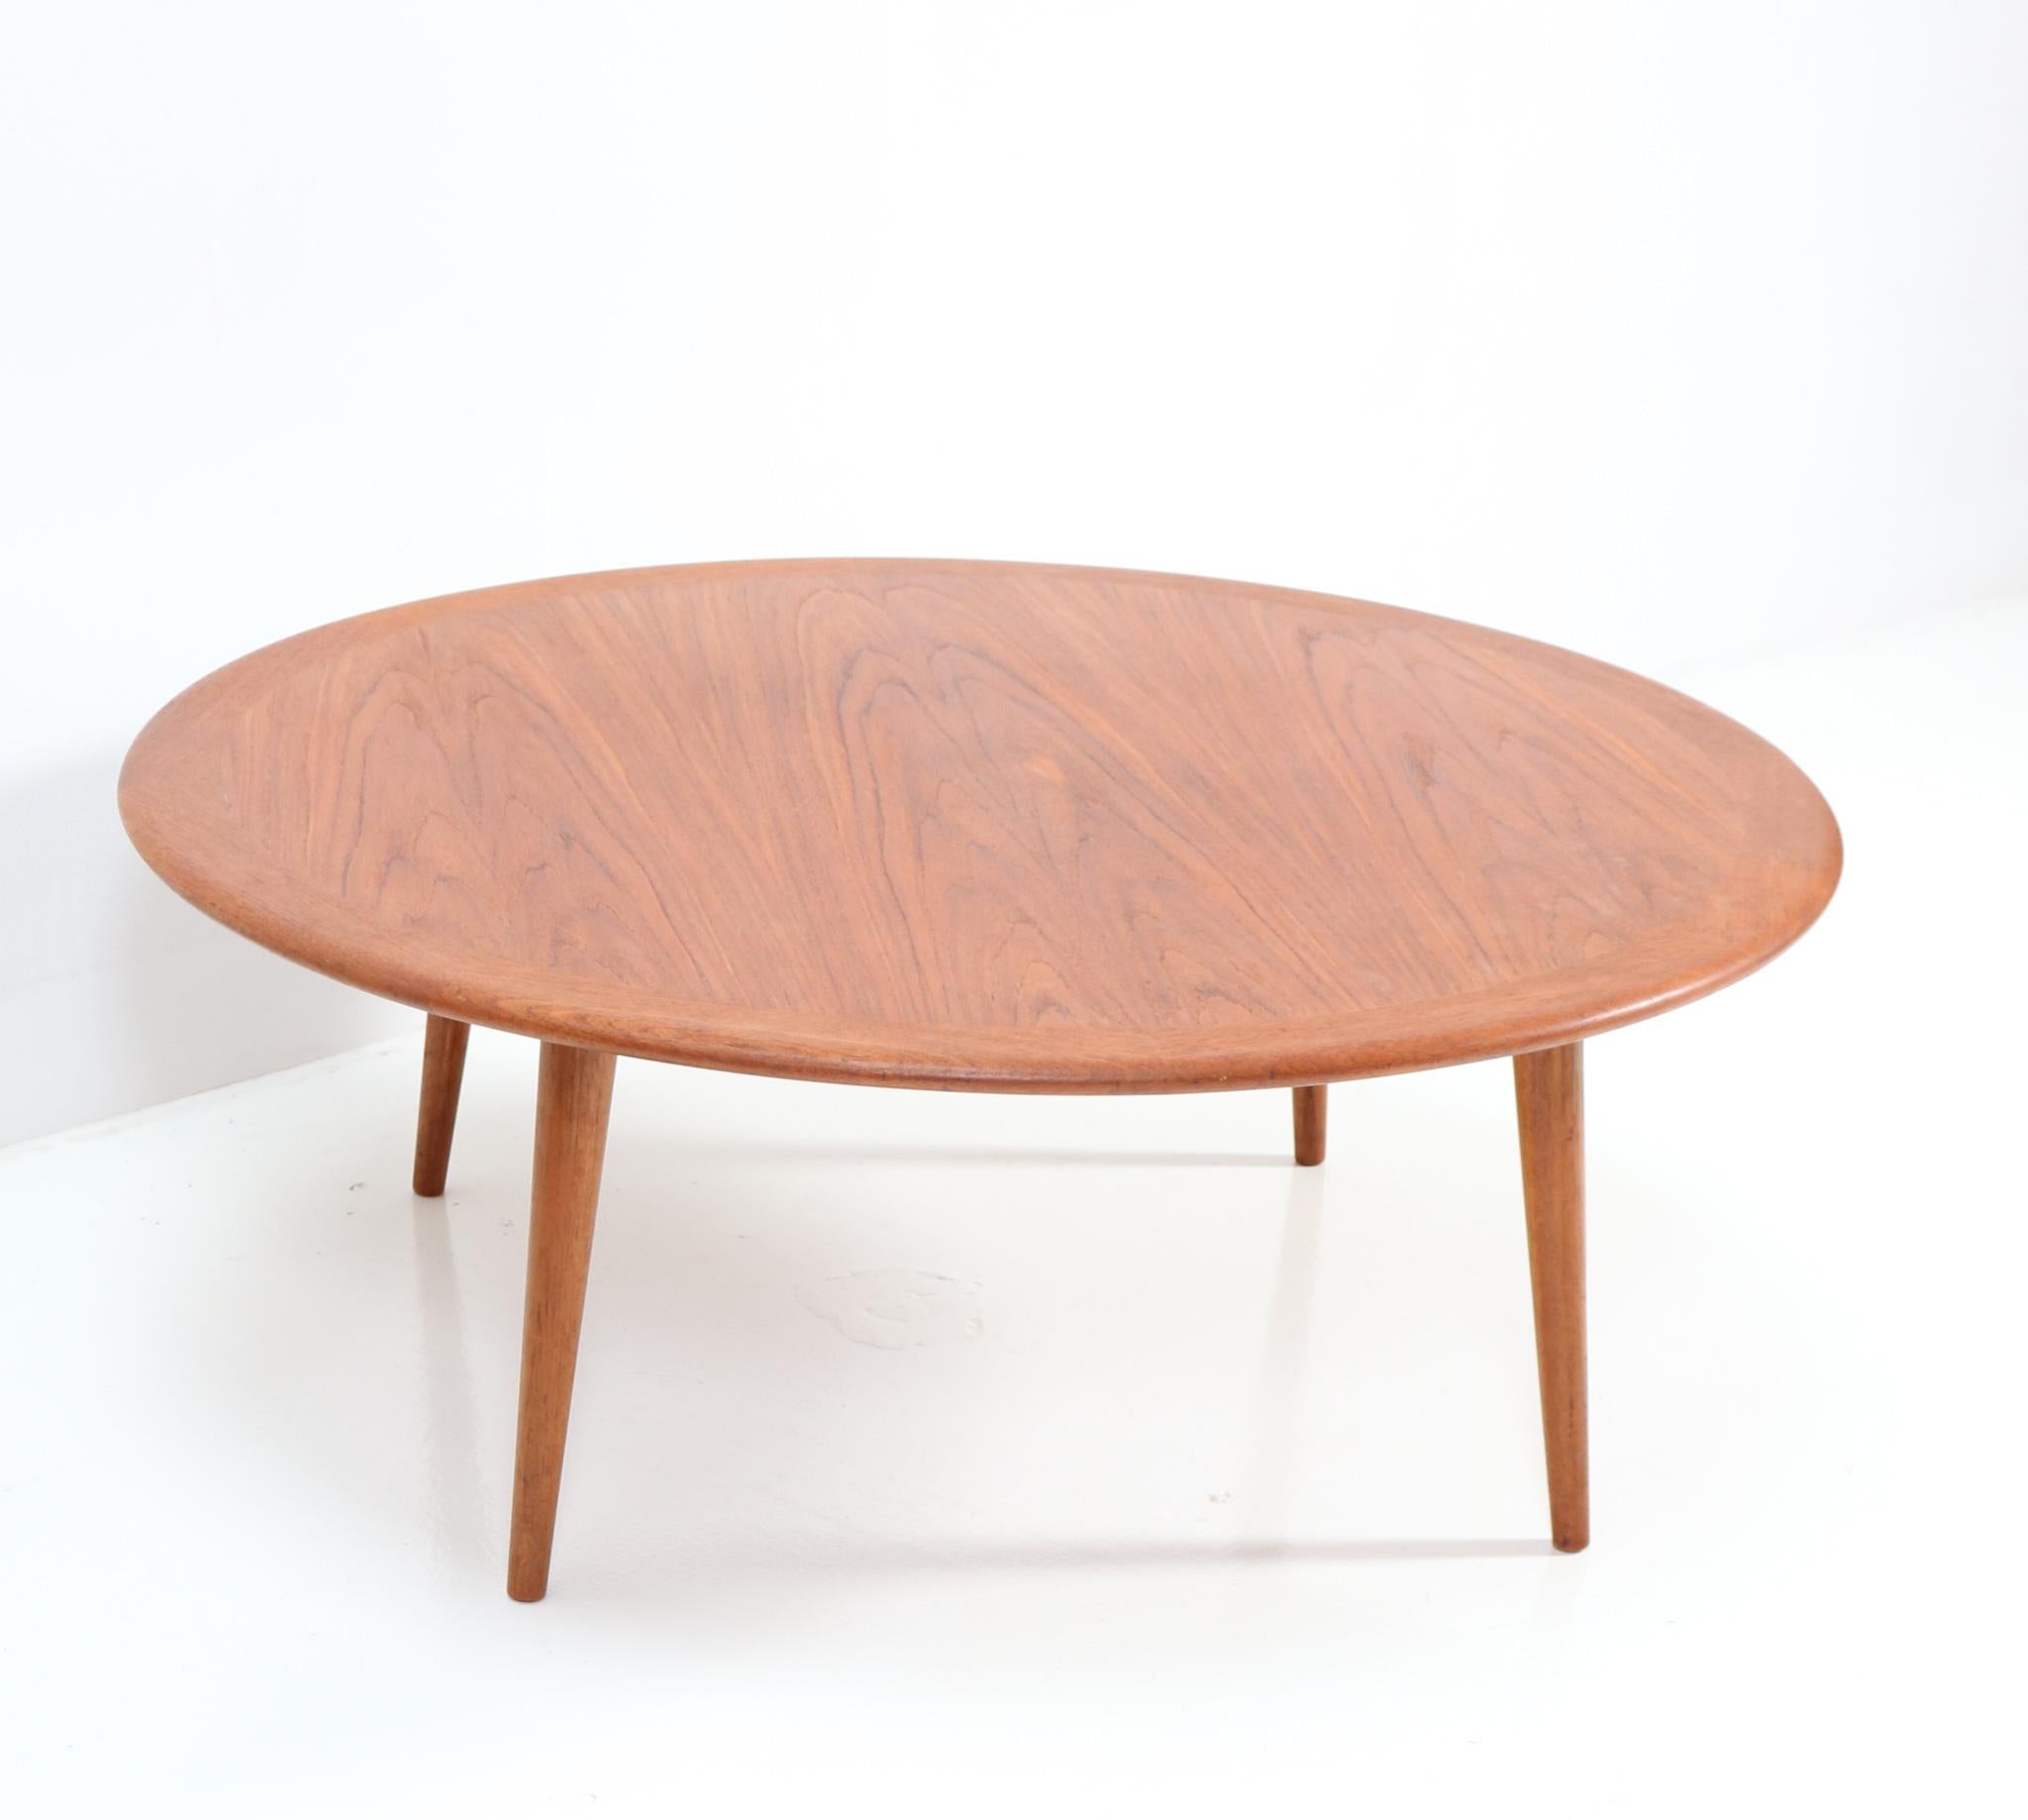 Dutch Mid-Century Modern Teak Coffee Table by Pander, 1960s For Sale